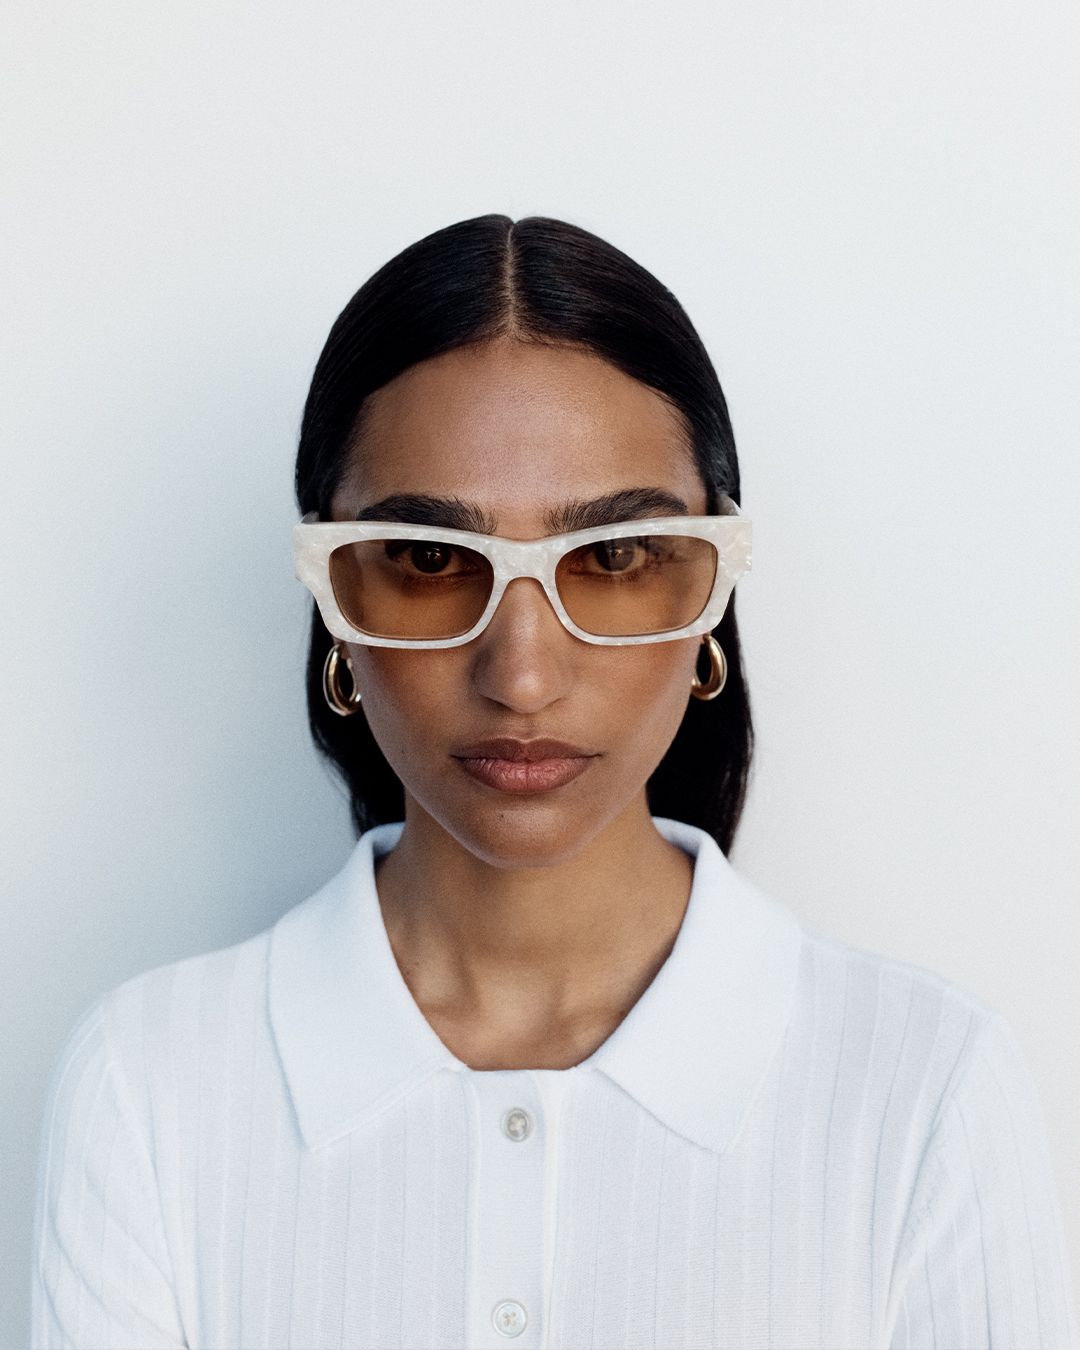 Model gazing at the camera wearing cream-coloured sunglasses with dark brown hair